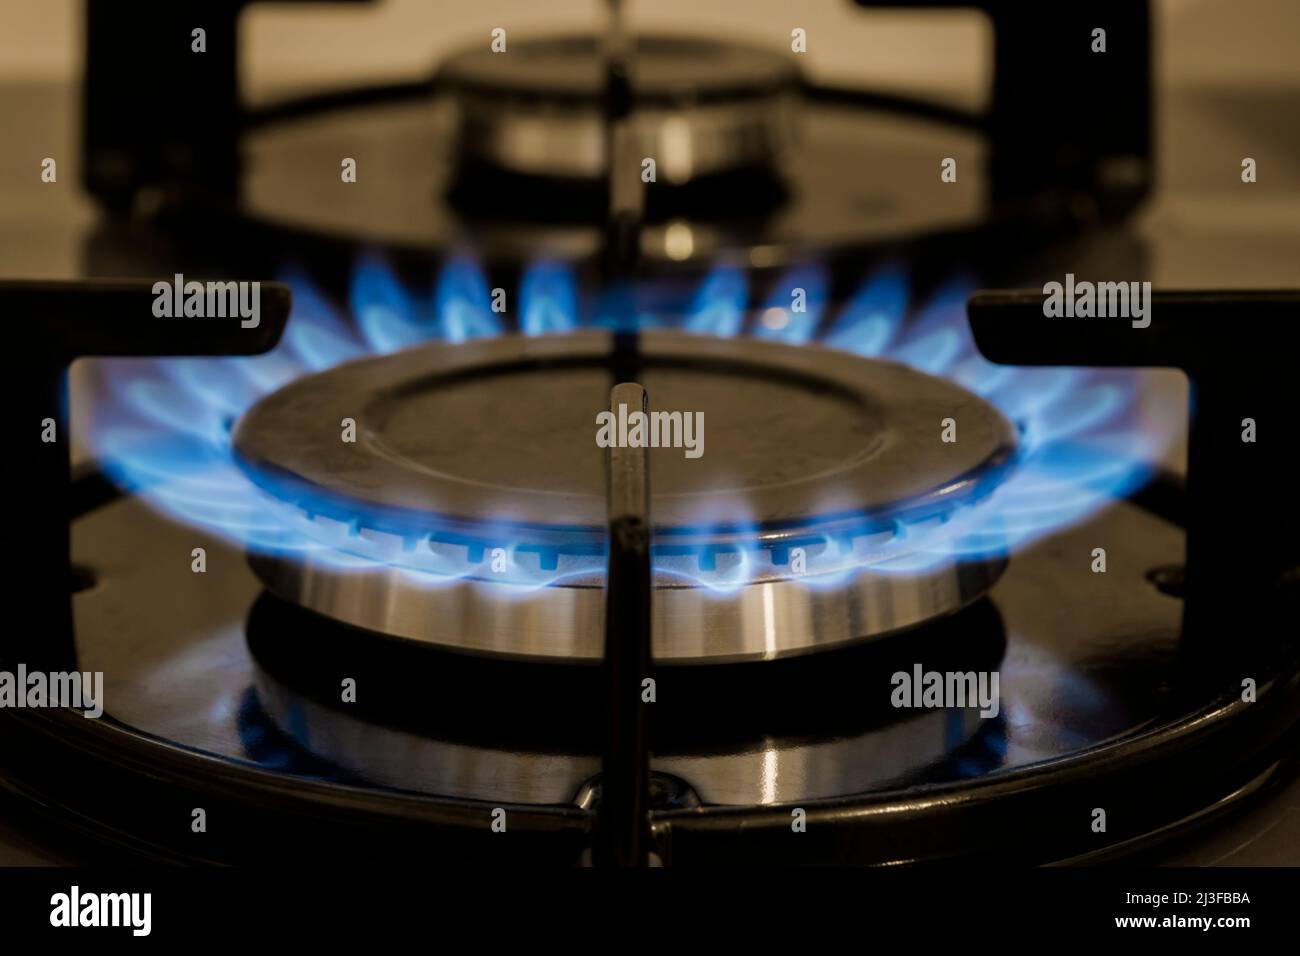 Flame On  Stove burner, close-Up Of Gas Stove Burners. Selective focus burner.  Selectice Focus Front view. Stock Photo